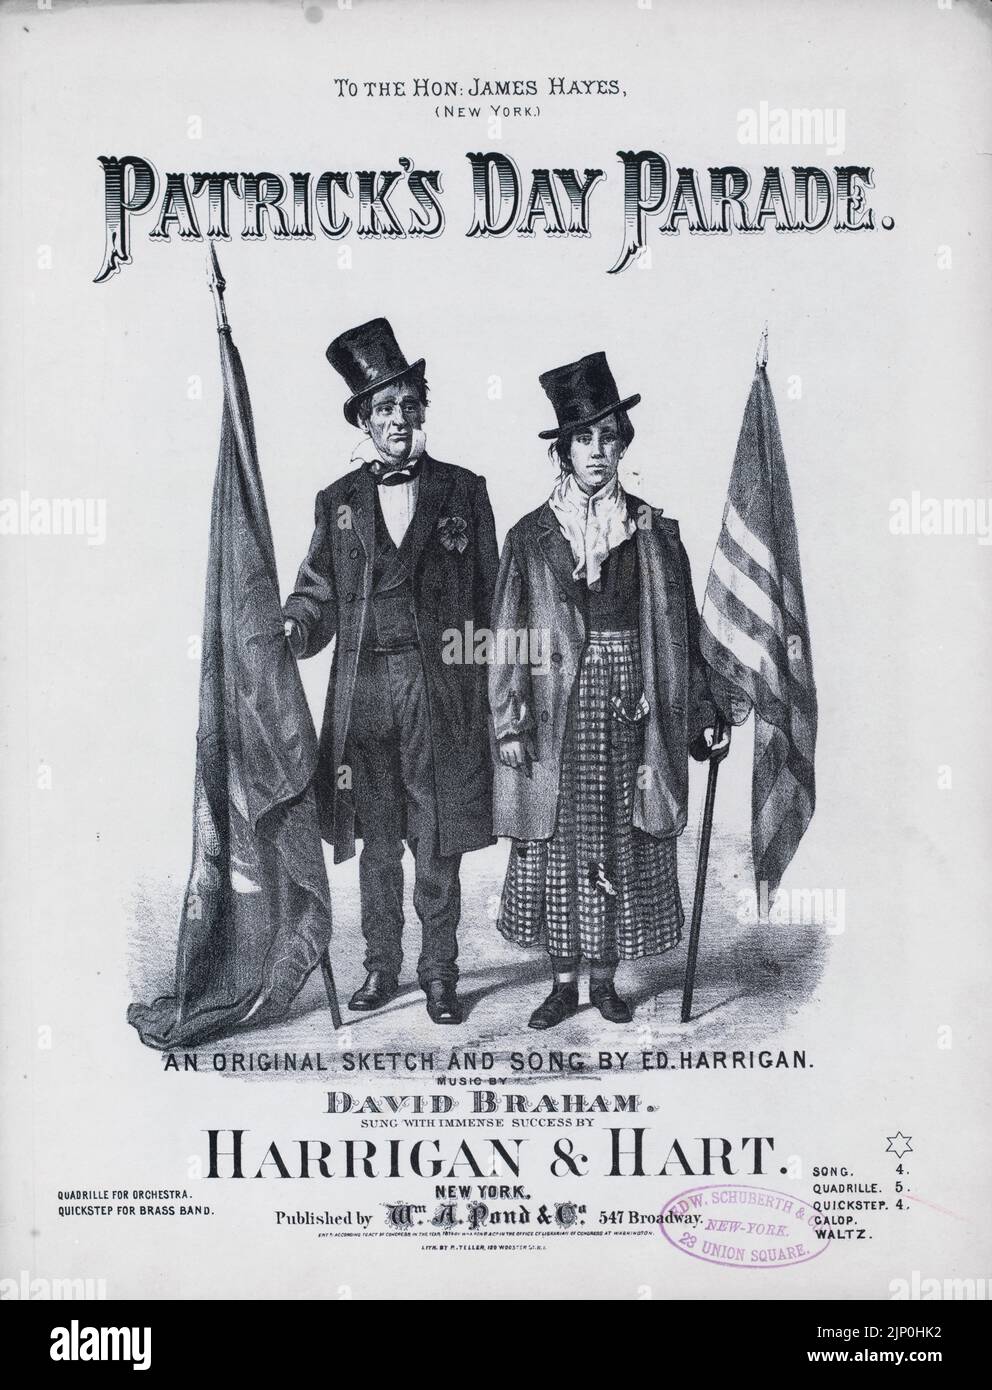 Patrick's Day Parade, Sketch and Song by Edward Harrigan, Music by David Braham, Sung with success by Harrigan and Hart, Published by William A. Pond and Company (1874) Sheet music cover Stock Photo